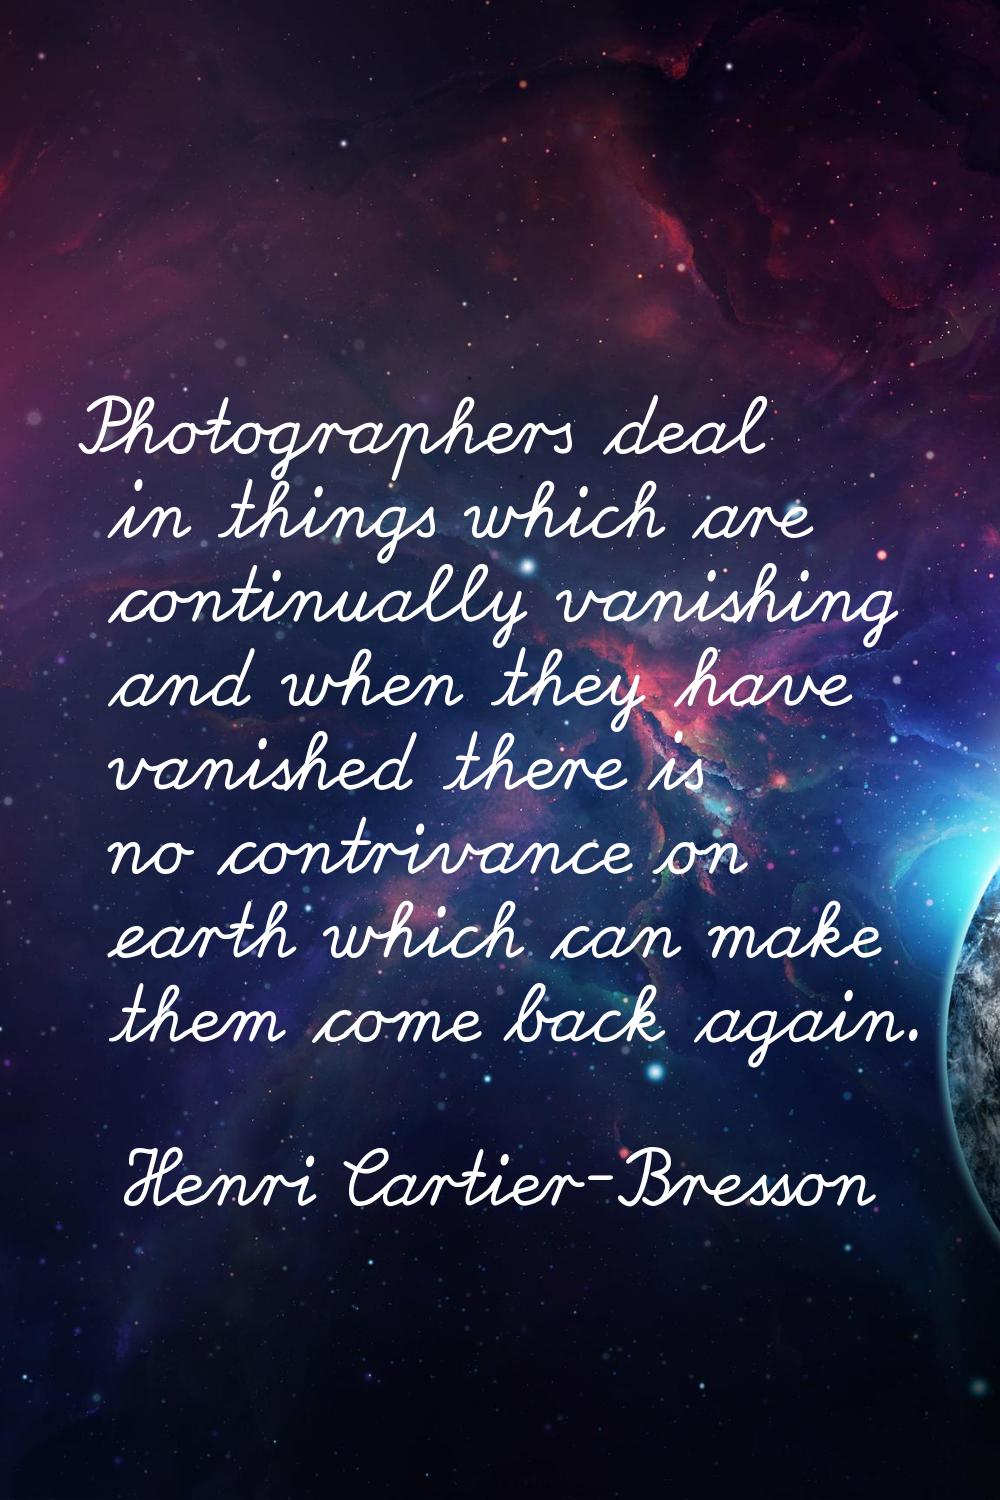 Photographers deal in things which are continually vanishing and when they have vanished there is n